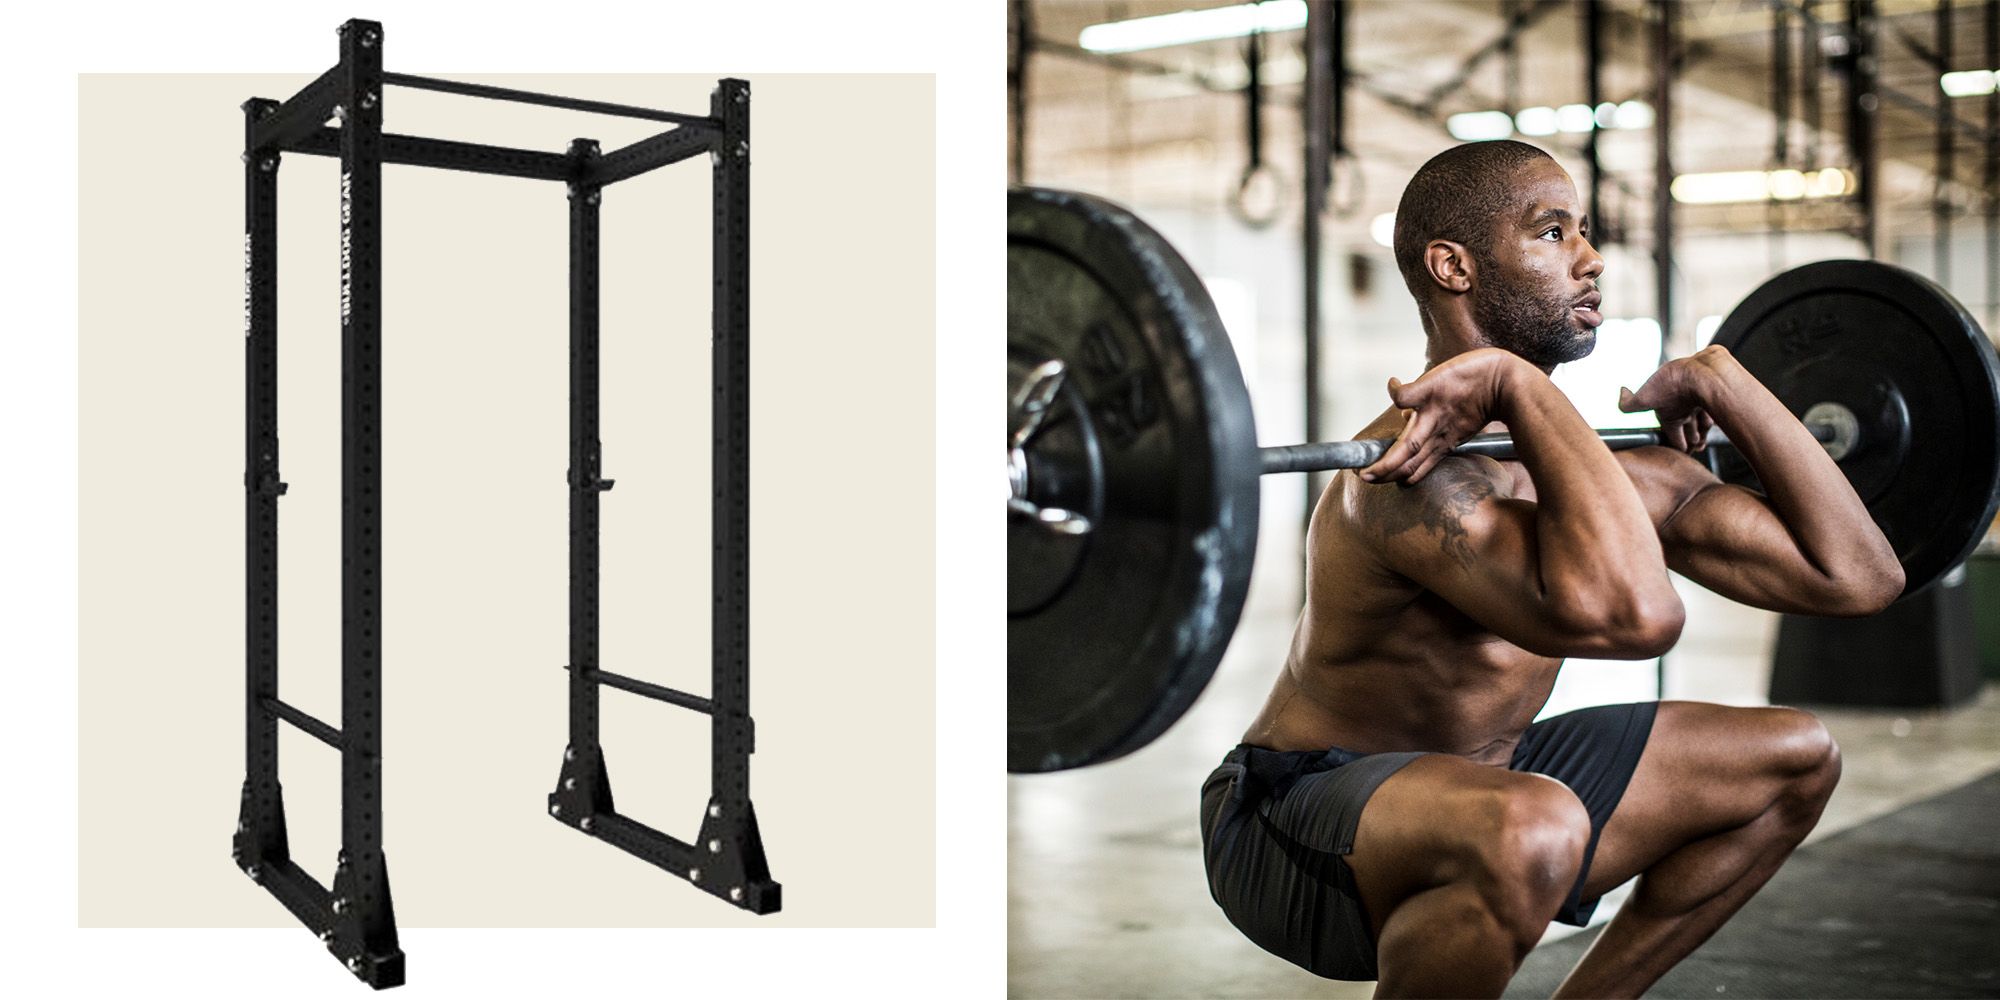 Fitness Power Tower Pull Up Bar Station Squat Rack Kenxen Power Rack Squat Stand Rack Power Cage 800LBS Weight Capacity Adjustable Weight Lift Bench Rack Home Gym Equipment Black 